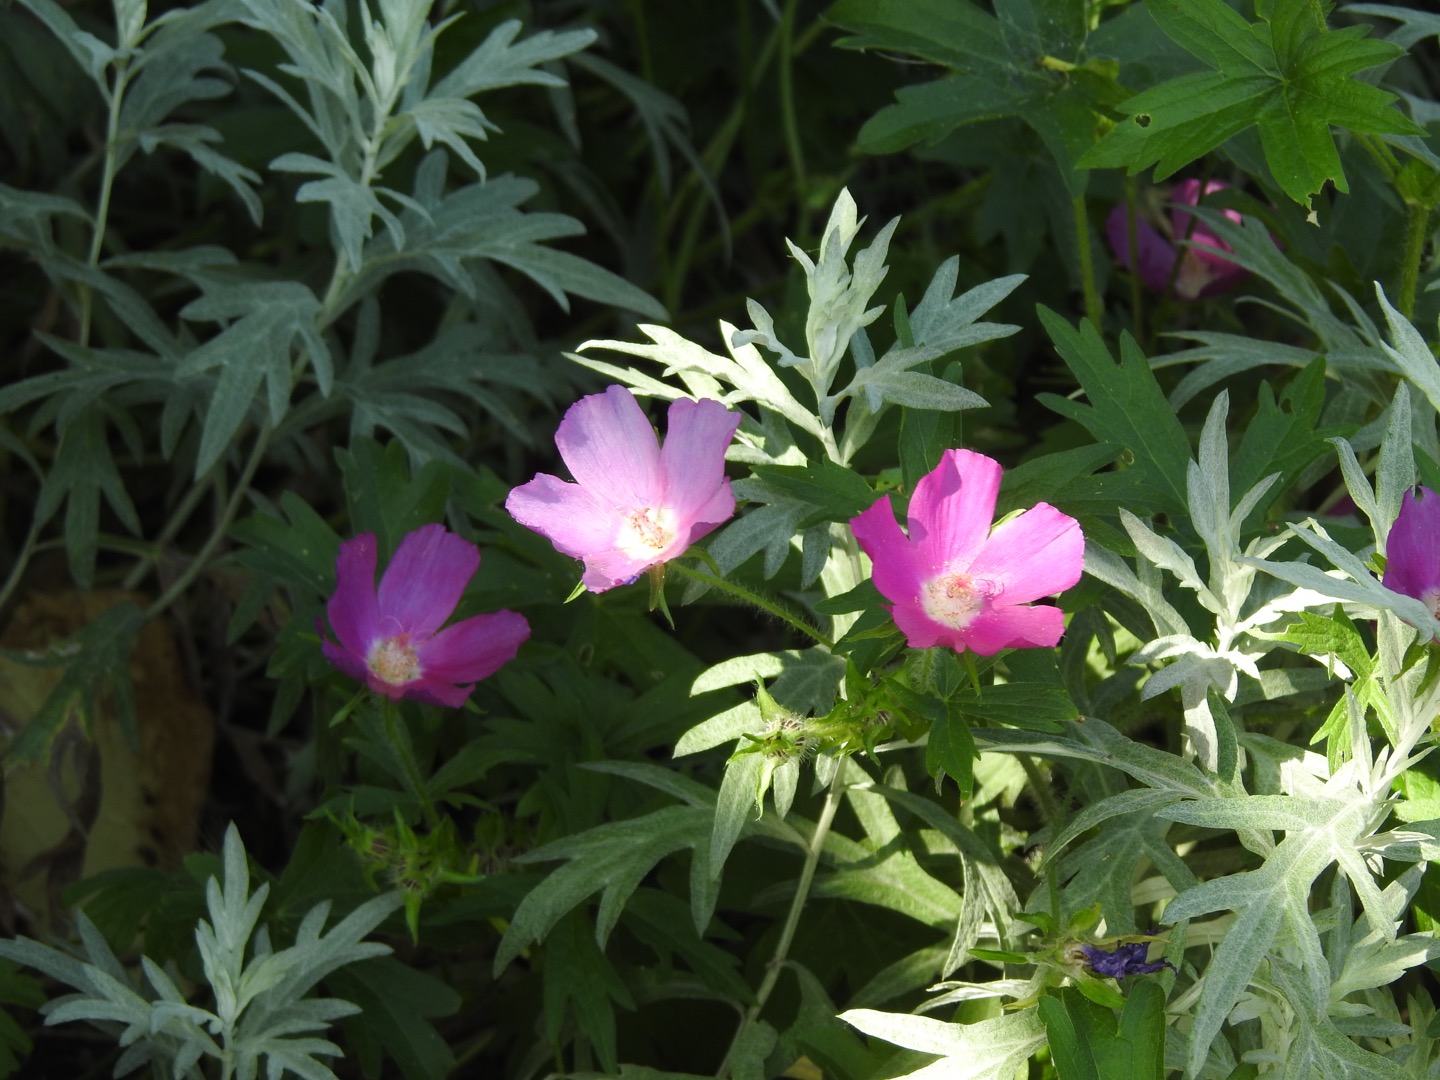 Pinkish-purple cup shaped flowers with green leaves in background